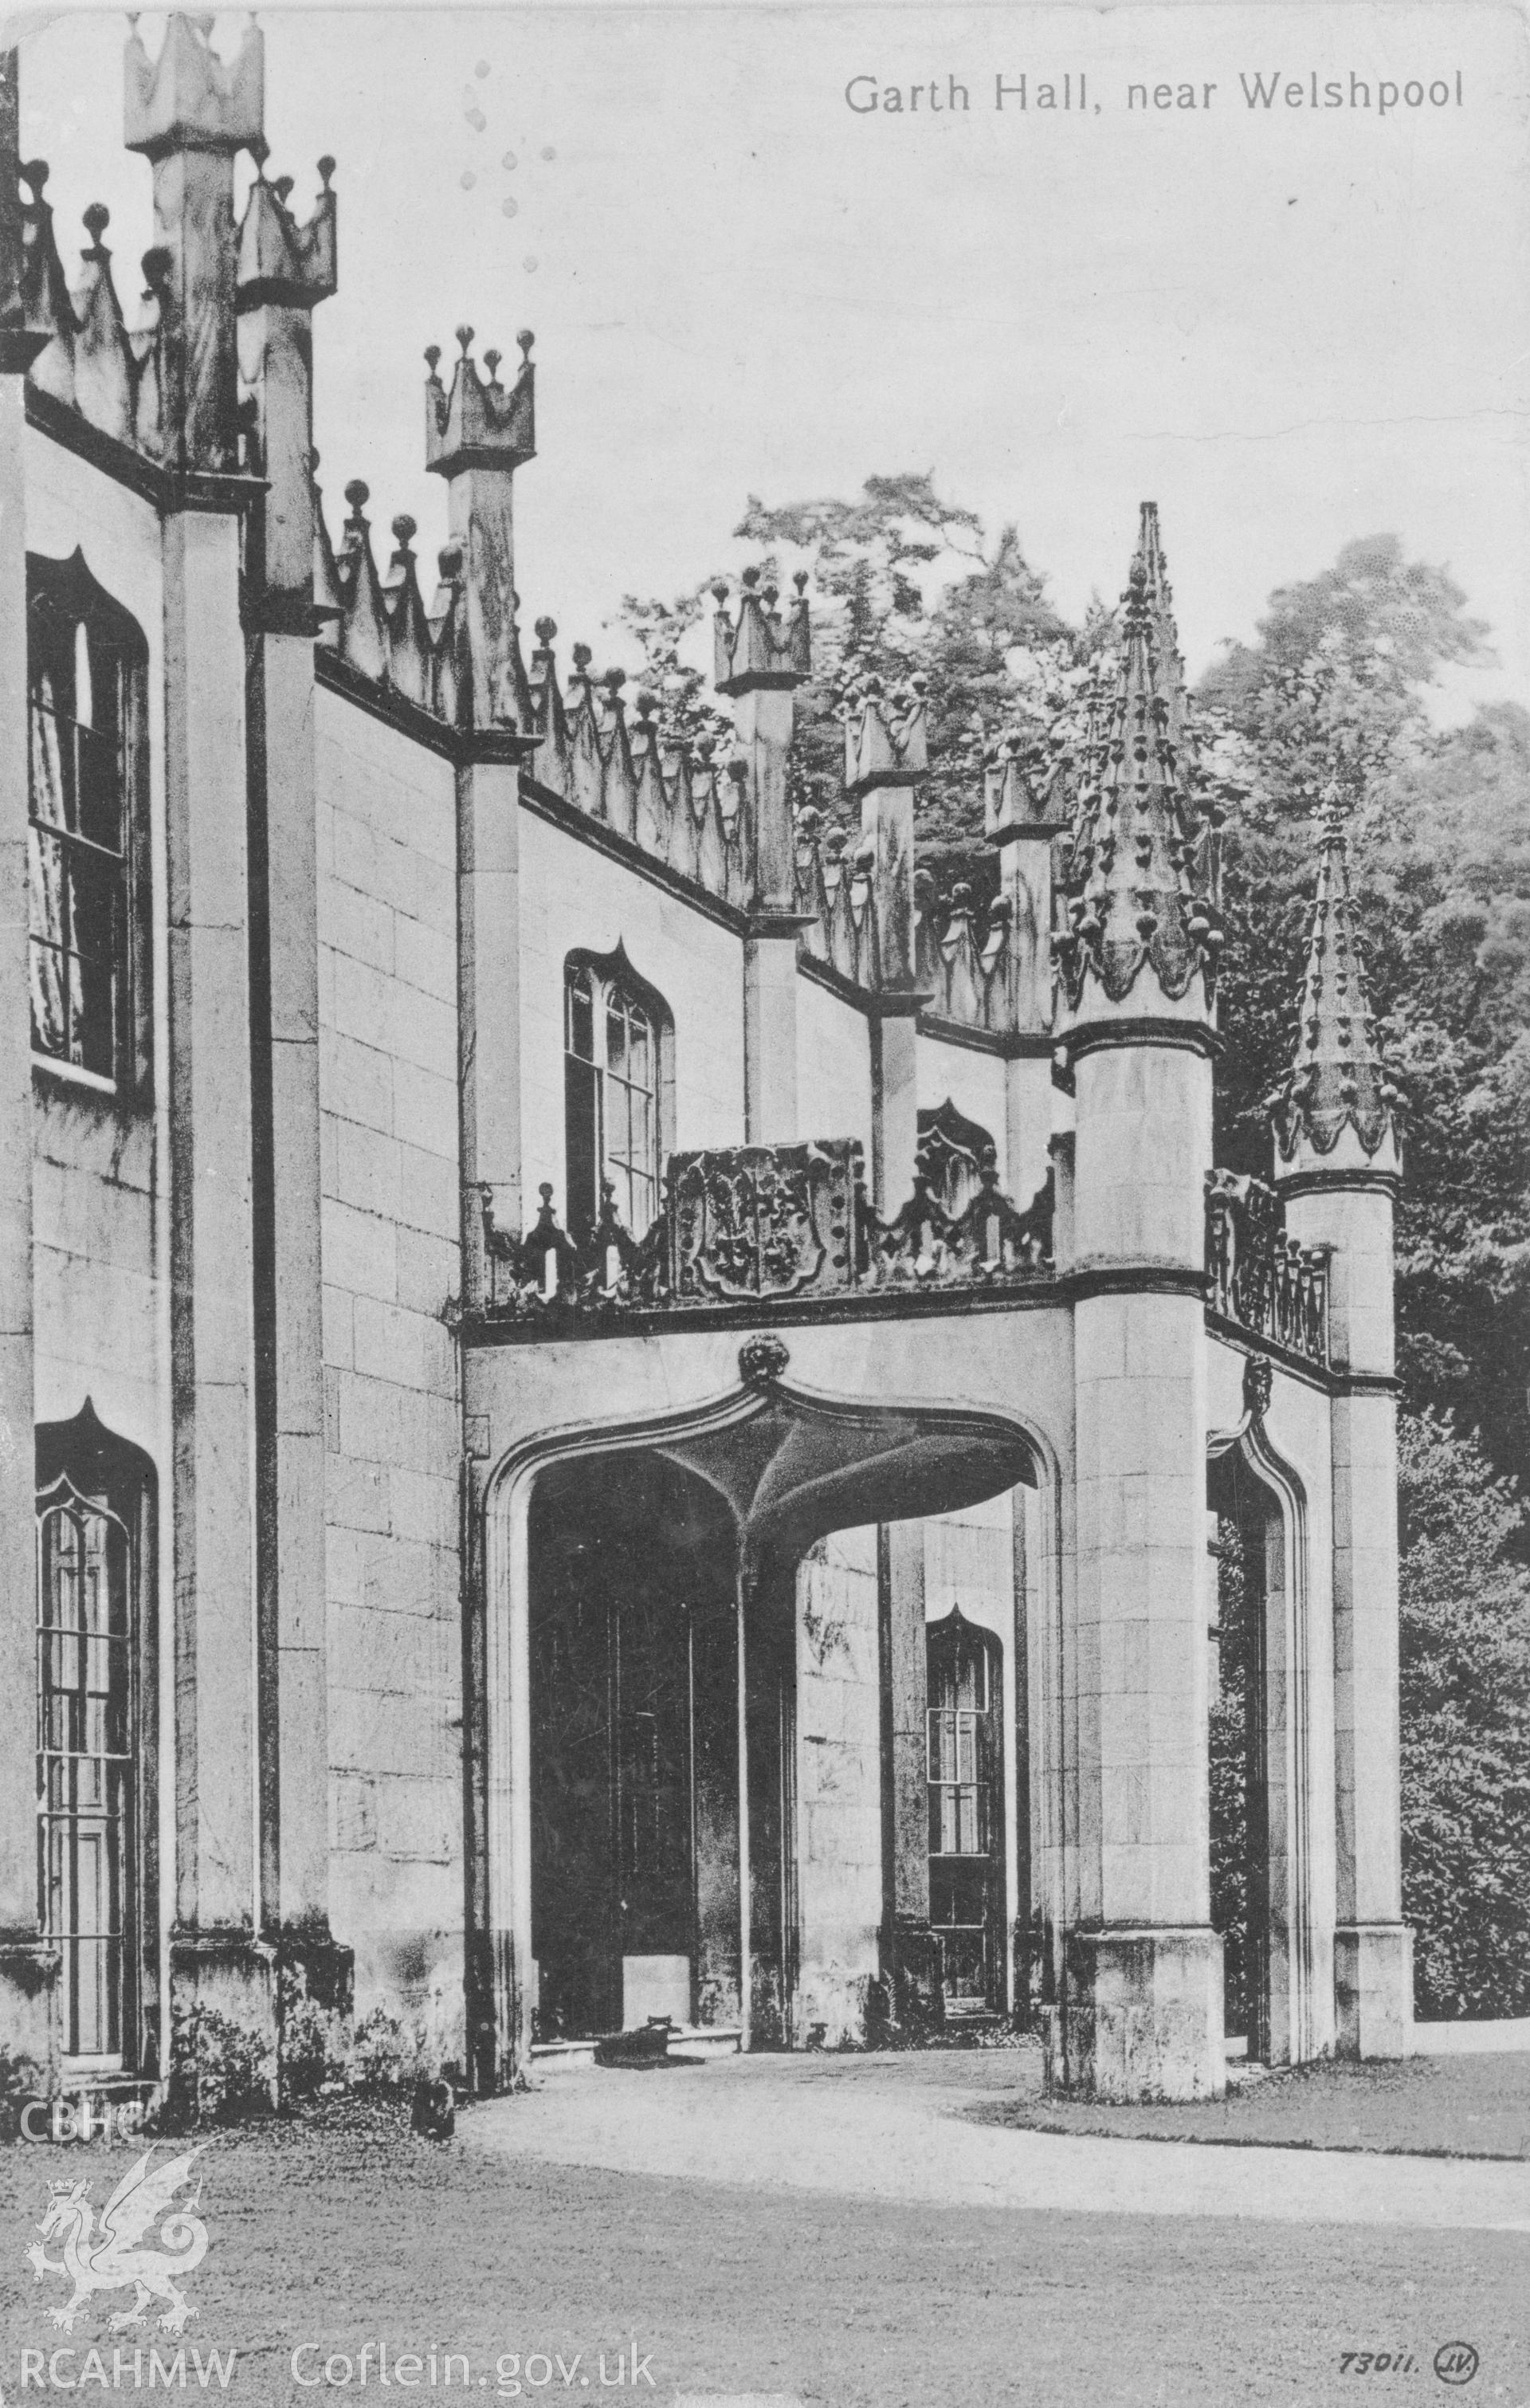 Digital copy of a black and white nitrate negative, exterior view of ornate porch at Garth Hall.